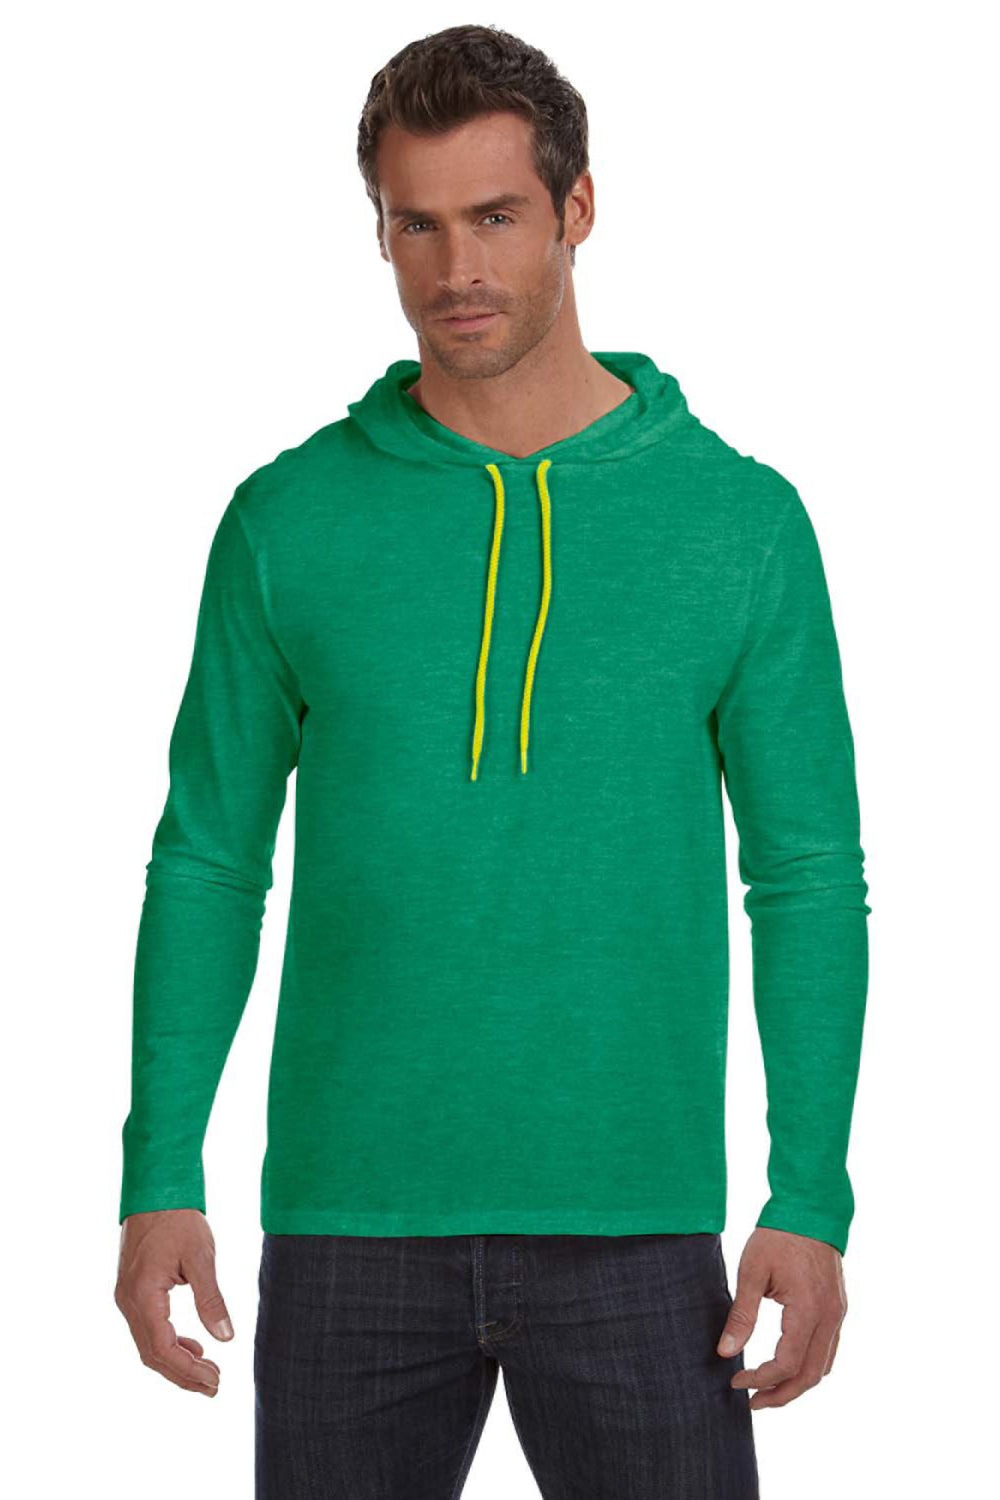 Anvil 987AN Mens Long Sleeve Hooded T-Shirt Hoodie Heather Green/Neon Yellow Front